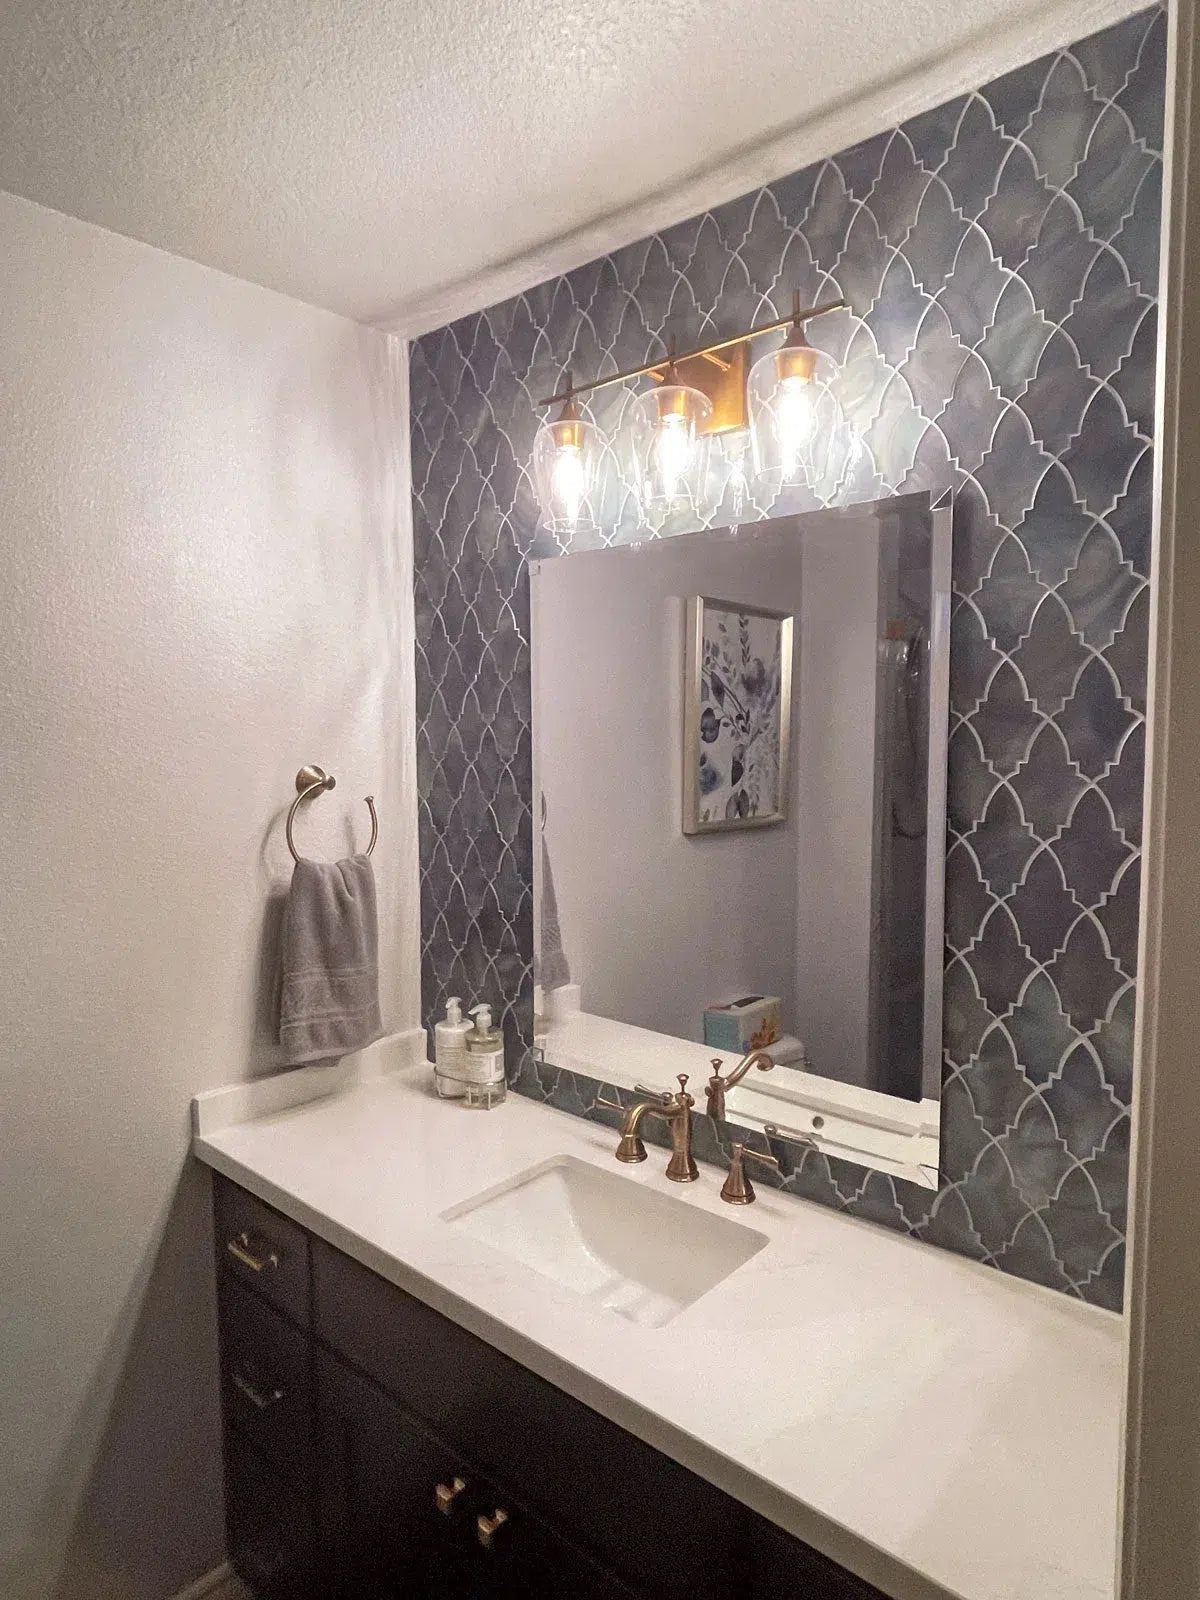 Brass and Dark Wood Bathroom Vanity with Sea Glass Louvre Blue Mosaic Tile